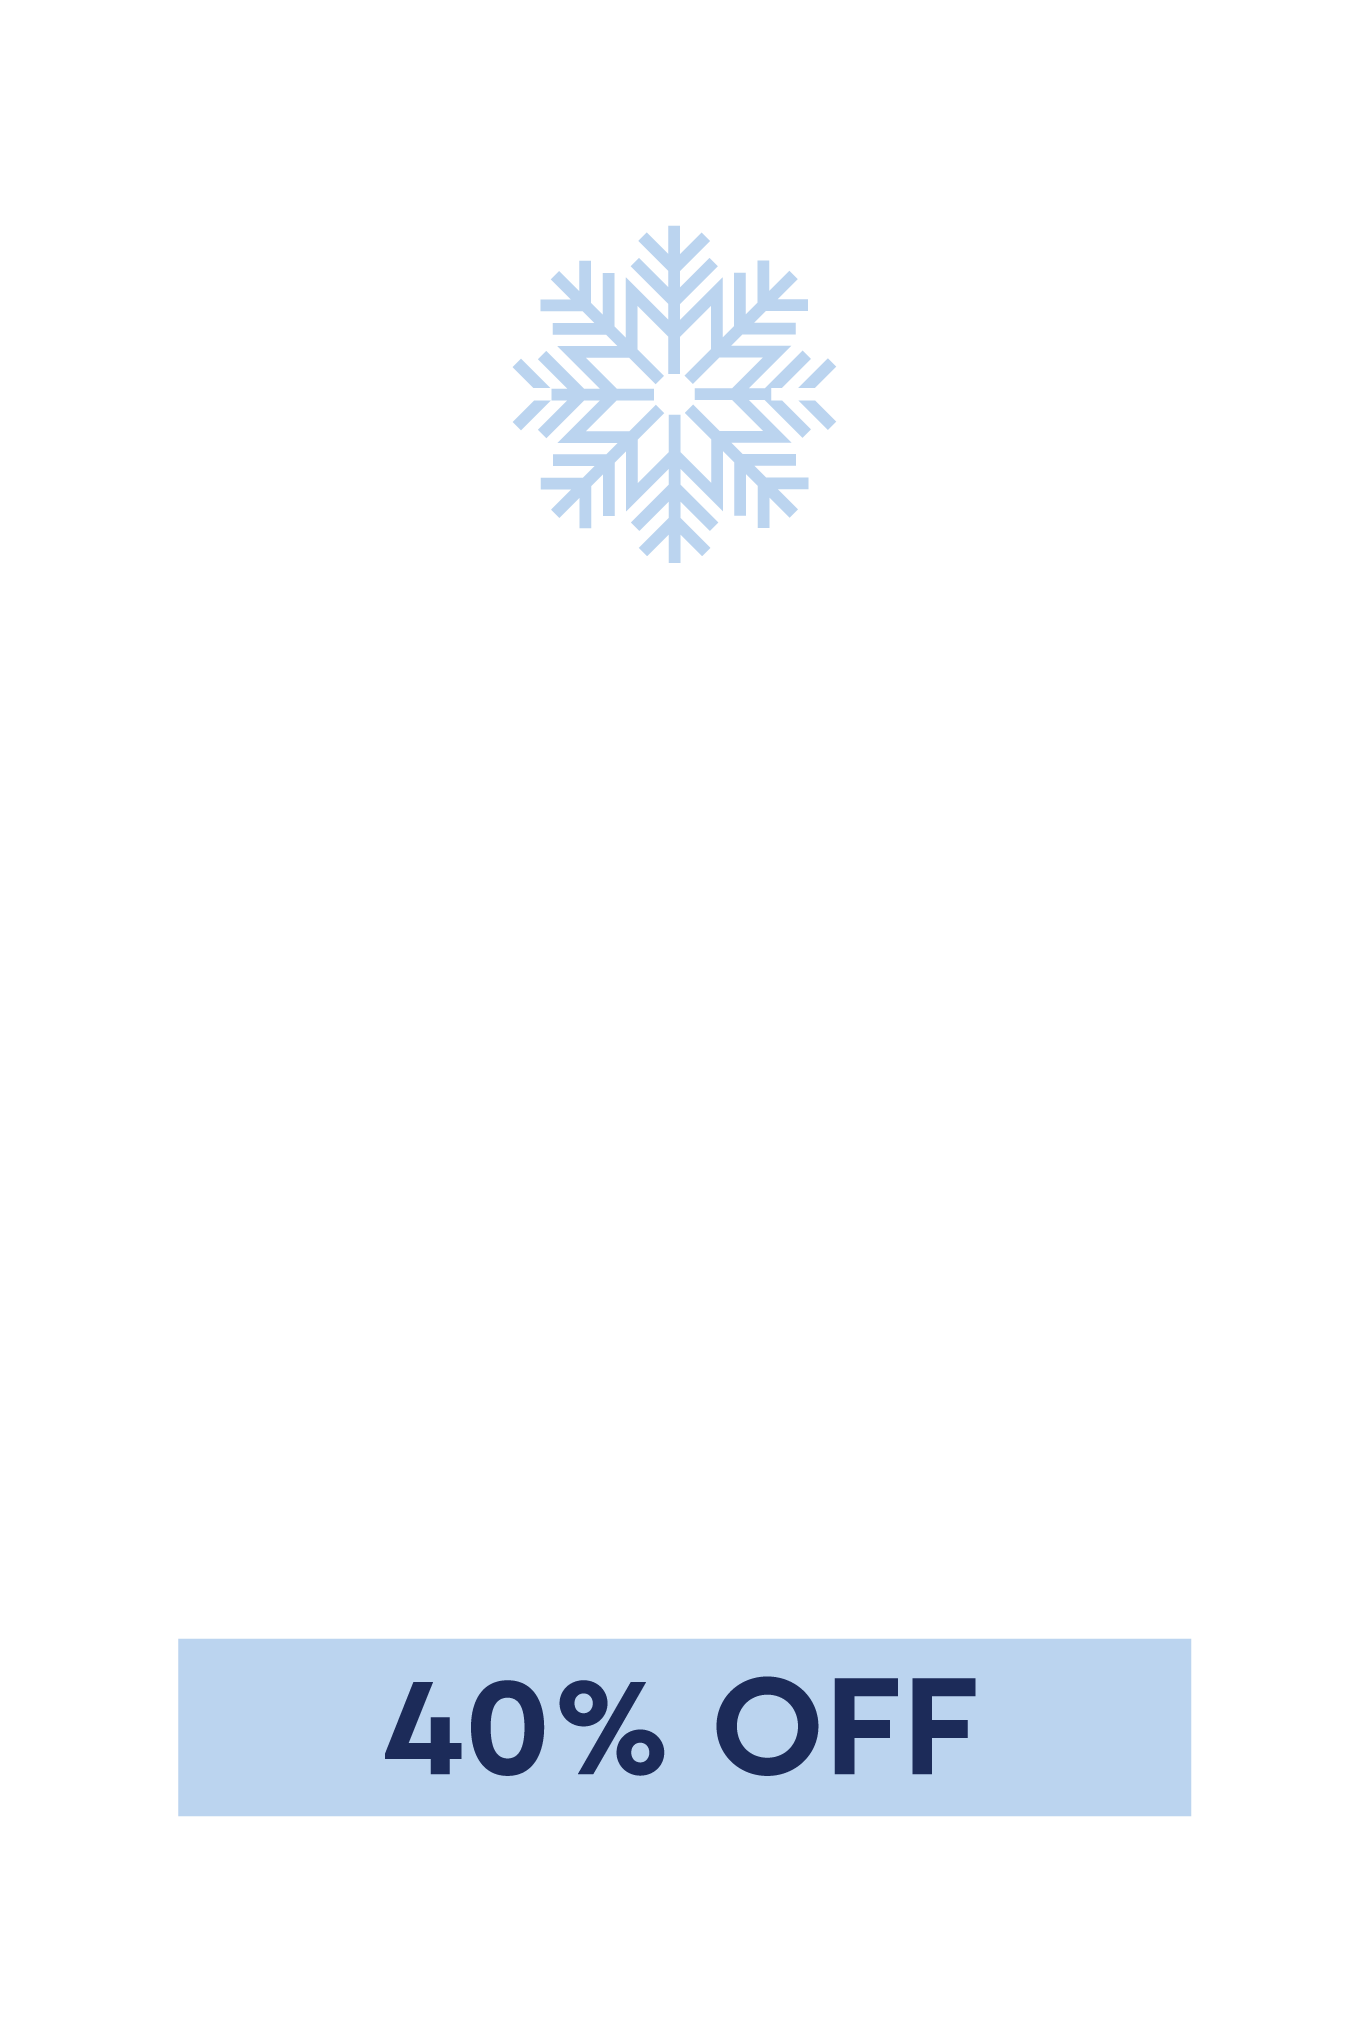 End of Spring Sale